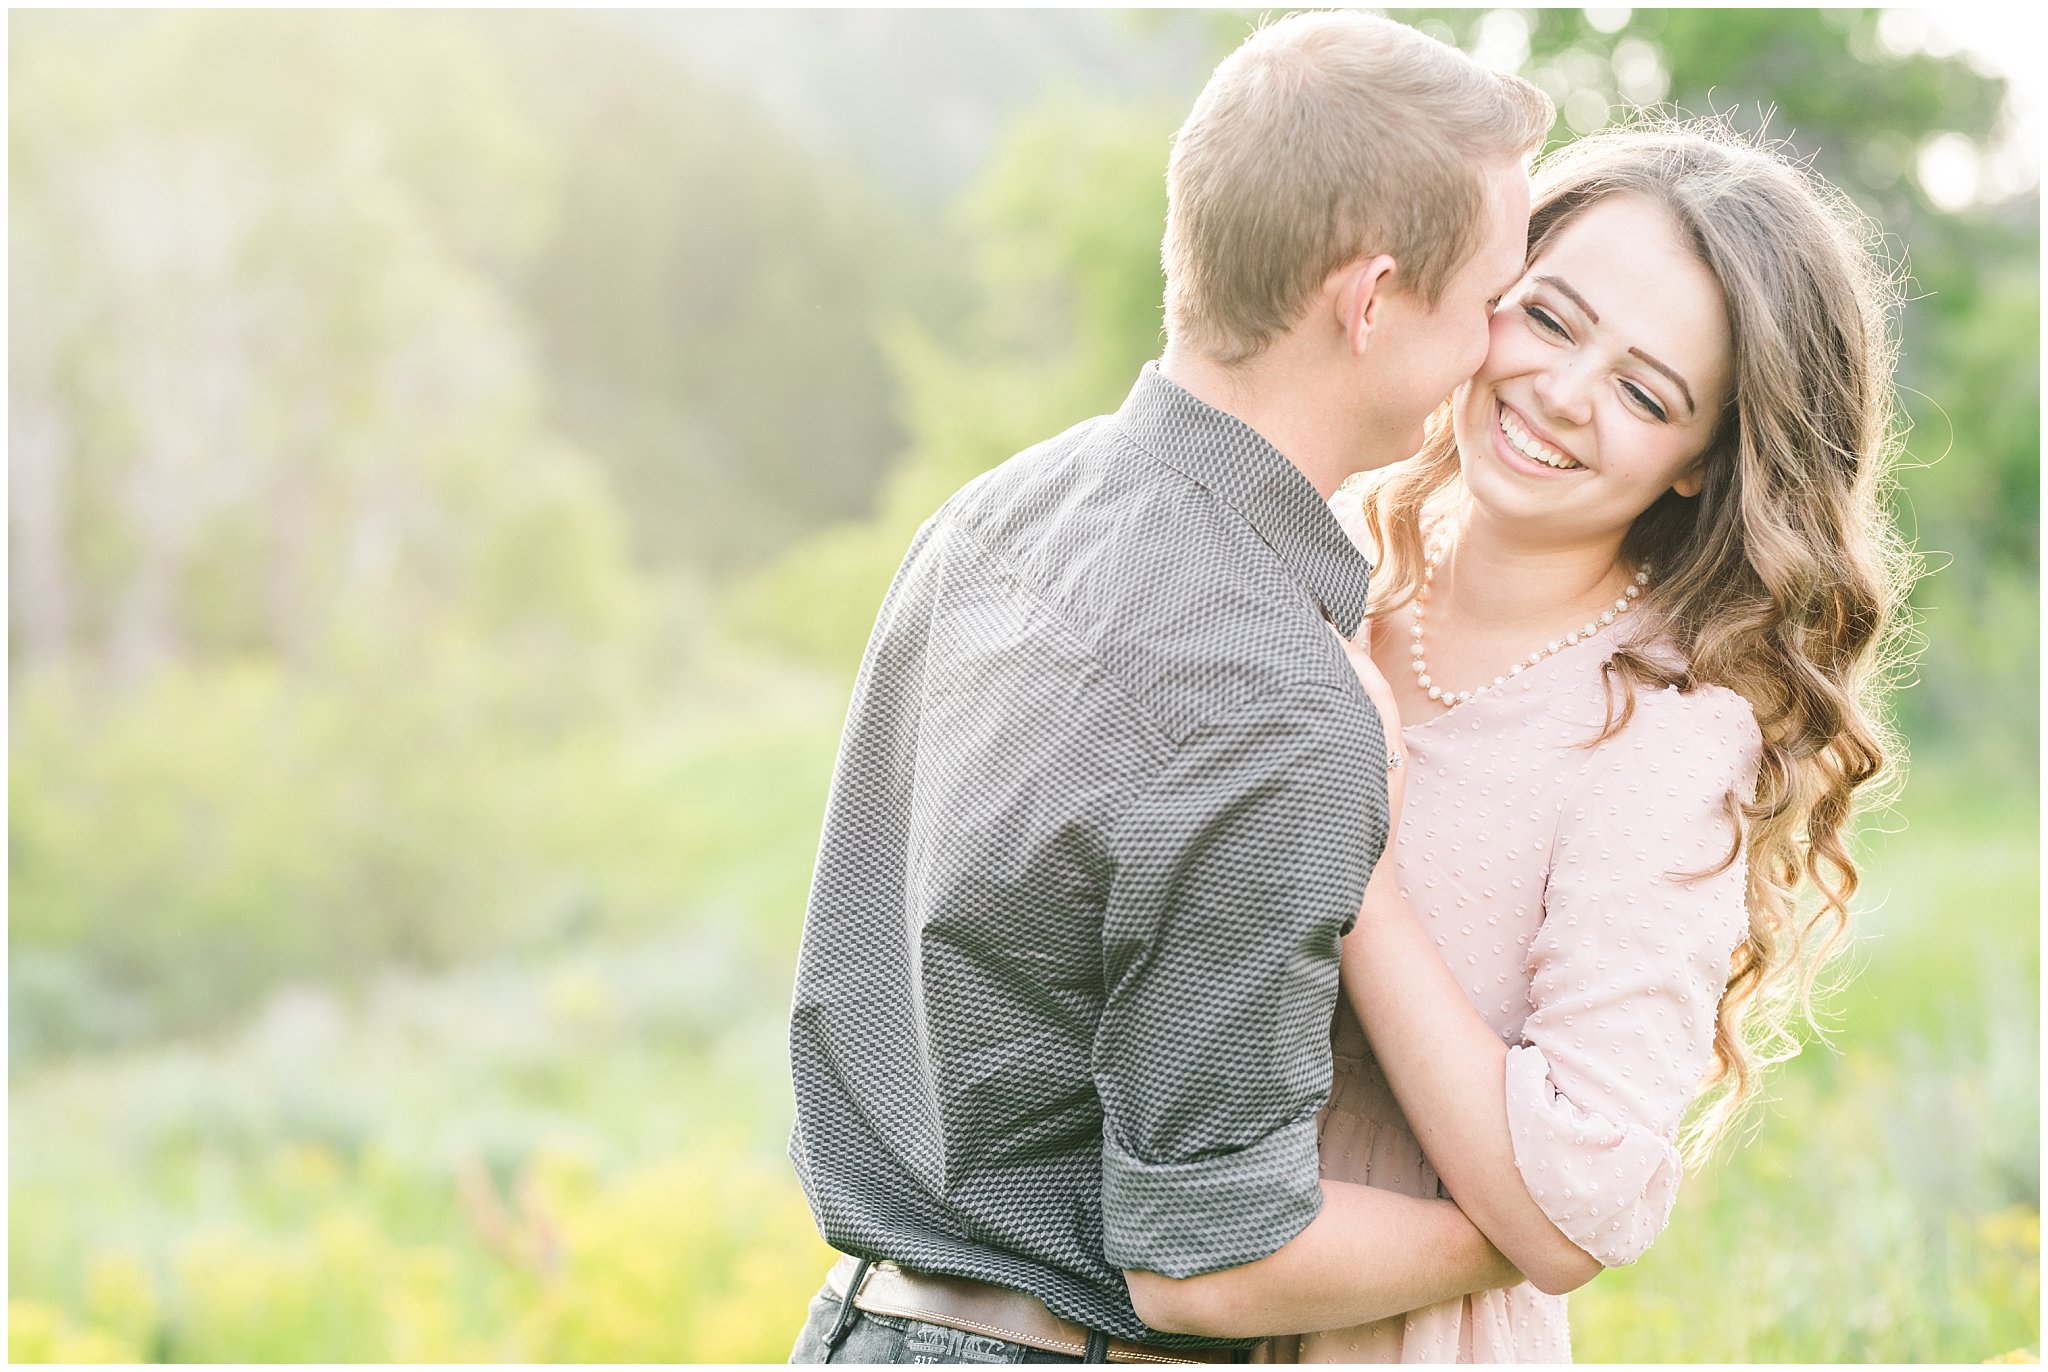 Couple in blush dress and grey and black buttoned shirt in a wooded meadow | Trapper's Loop Mountain Engagement | Utah Mountain Engagement Session | Jessie and Dallin Photography